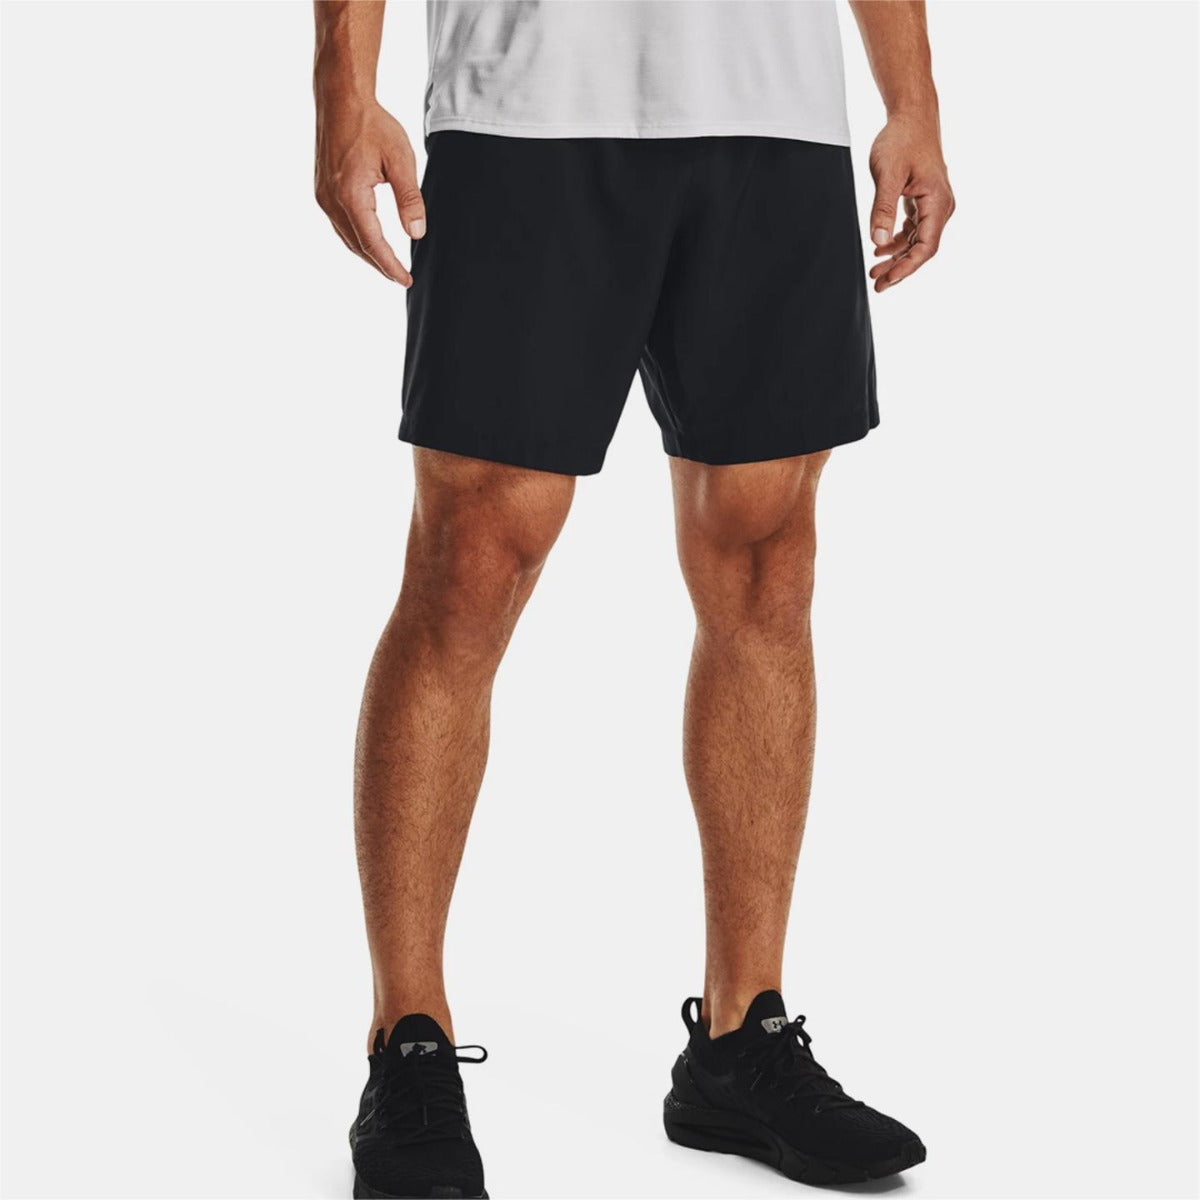 Under Armor Woven Graphic Shorts - Black/White